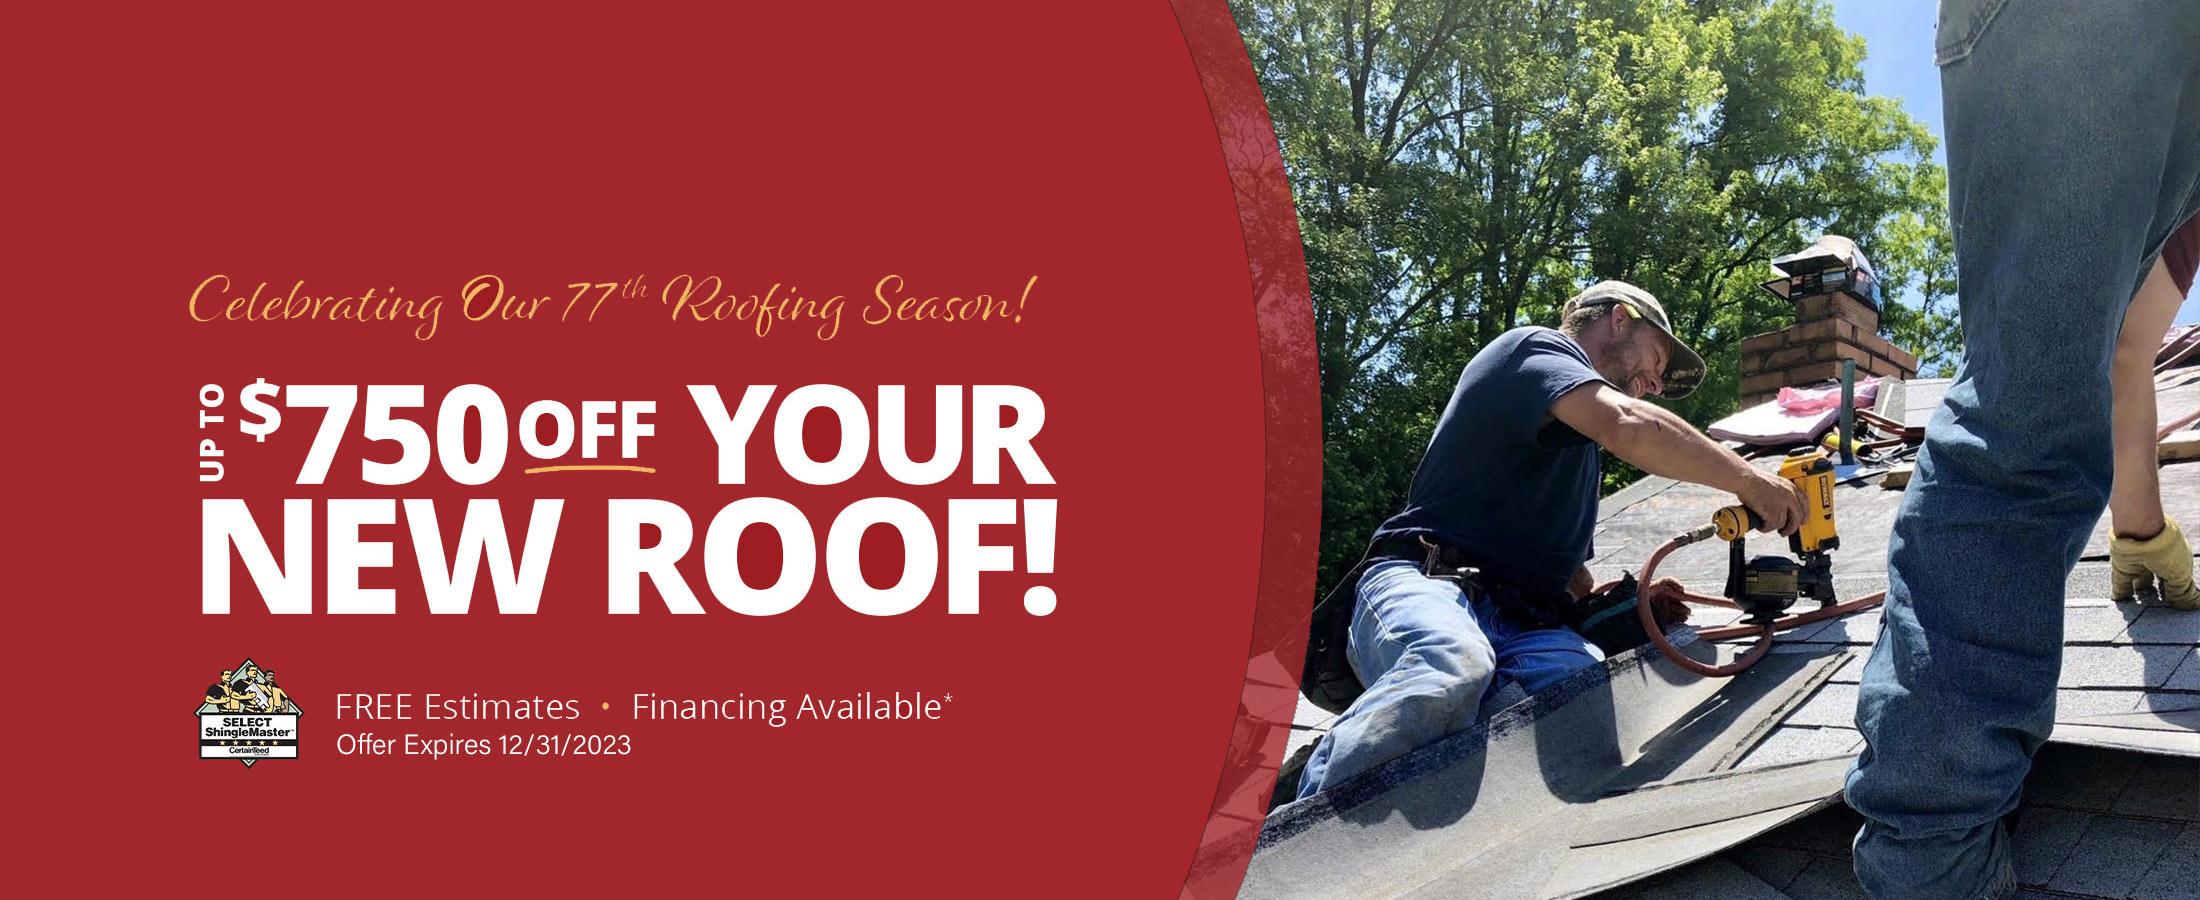 $750 Off Your New Roof Promo